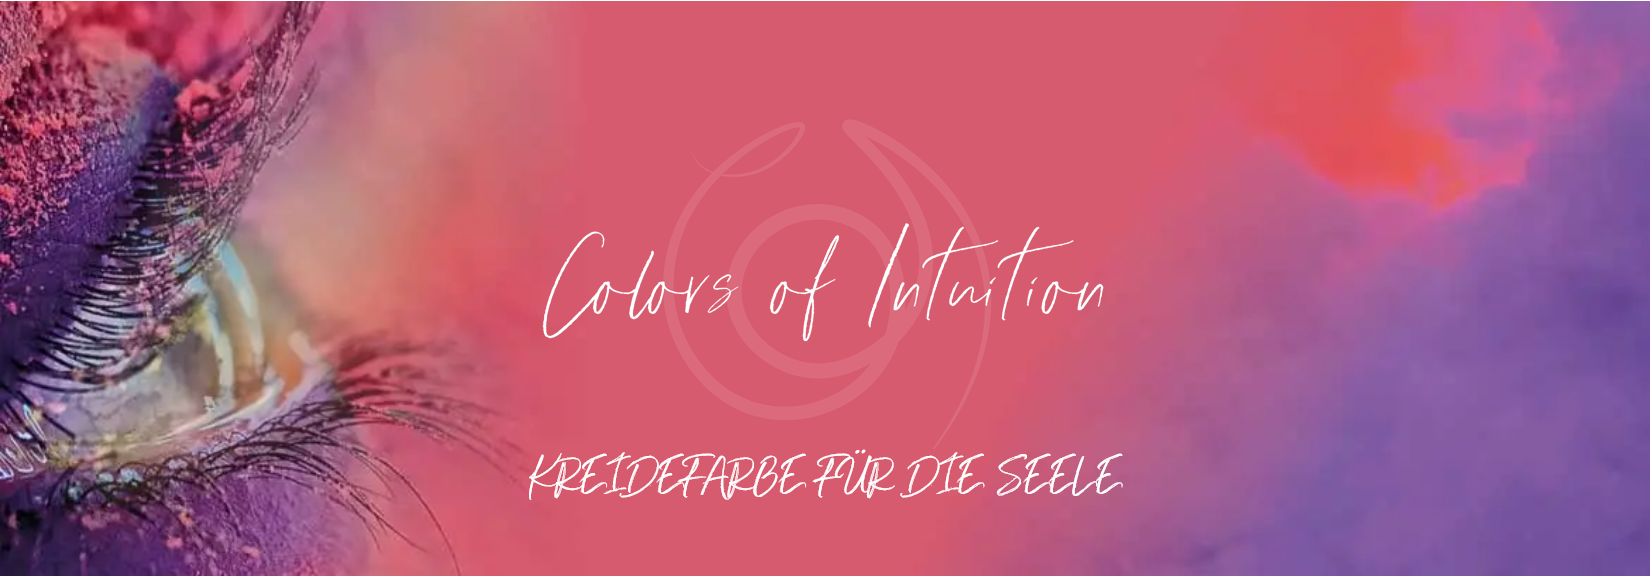 Colors of Intuition